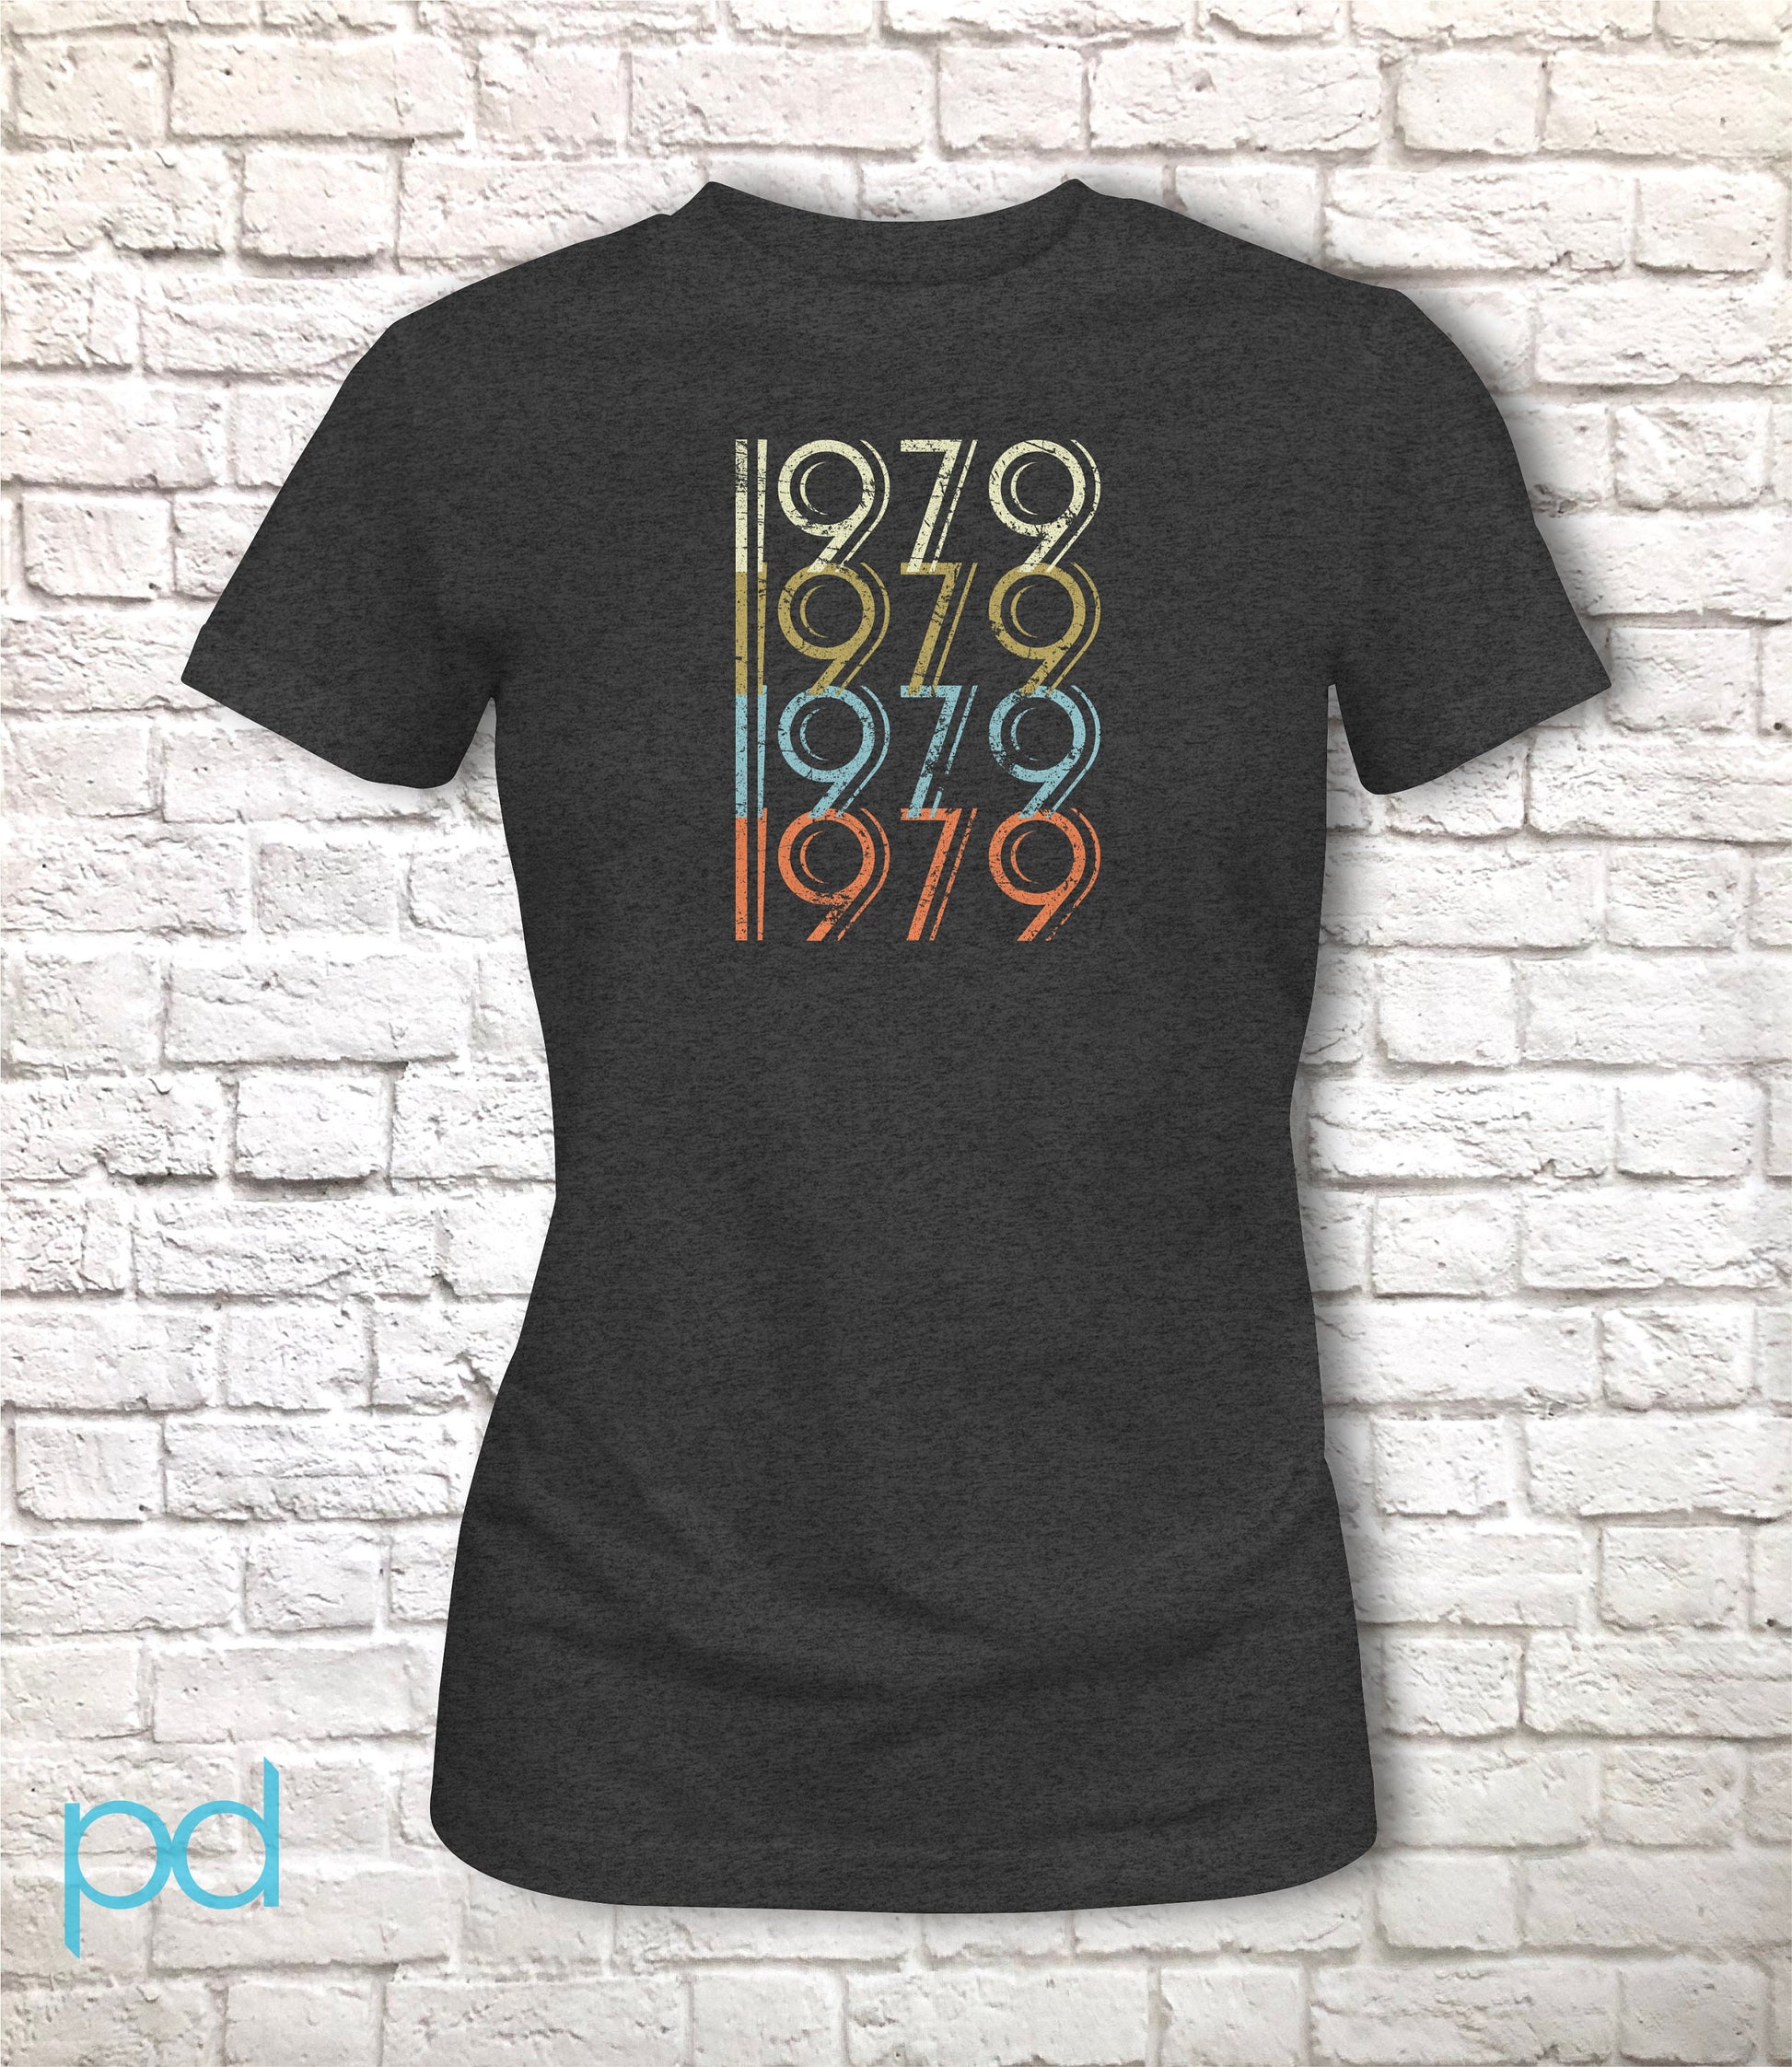 43rd Birthday Gift, 1979 T Shirt in Retro & Vintage 70s style for Women Fitted Short Sleeve Lady Fit Tee Shirt Top